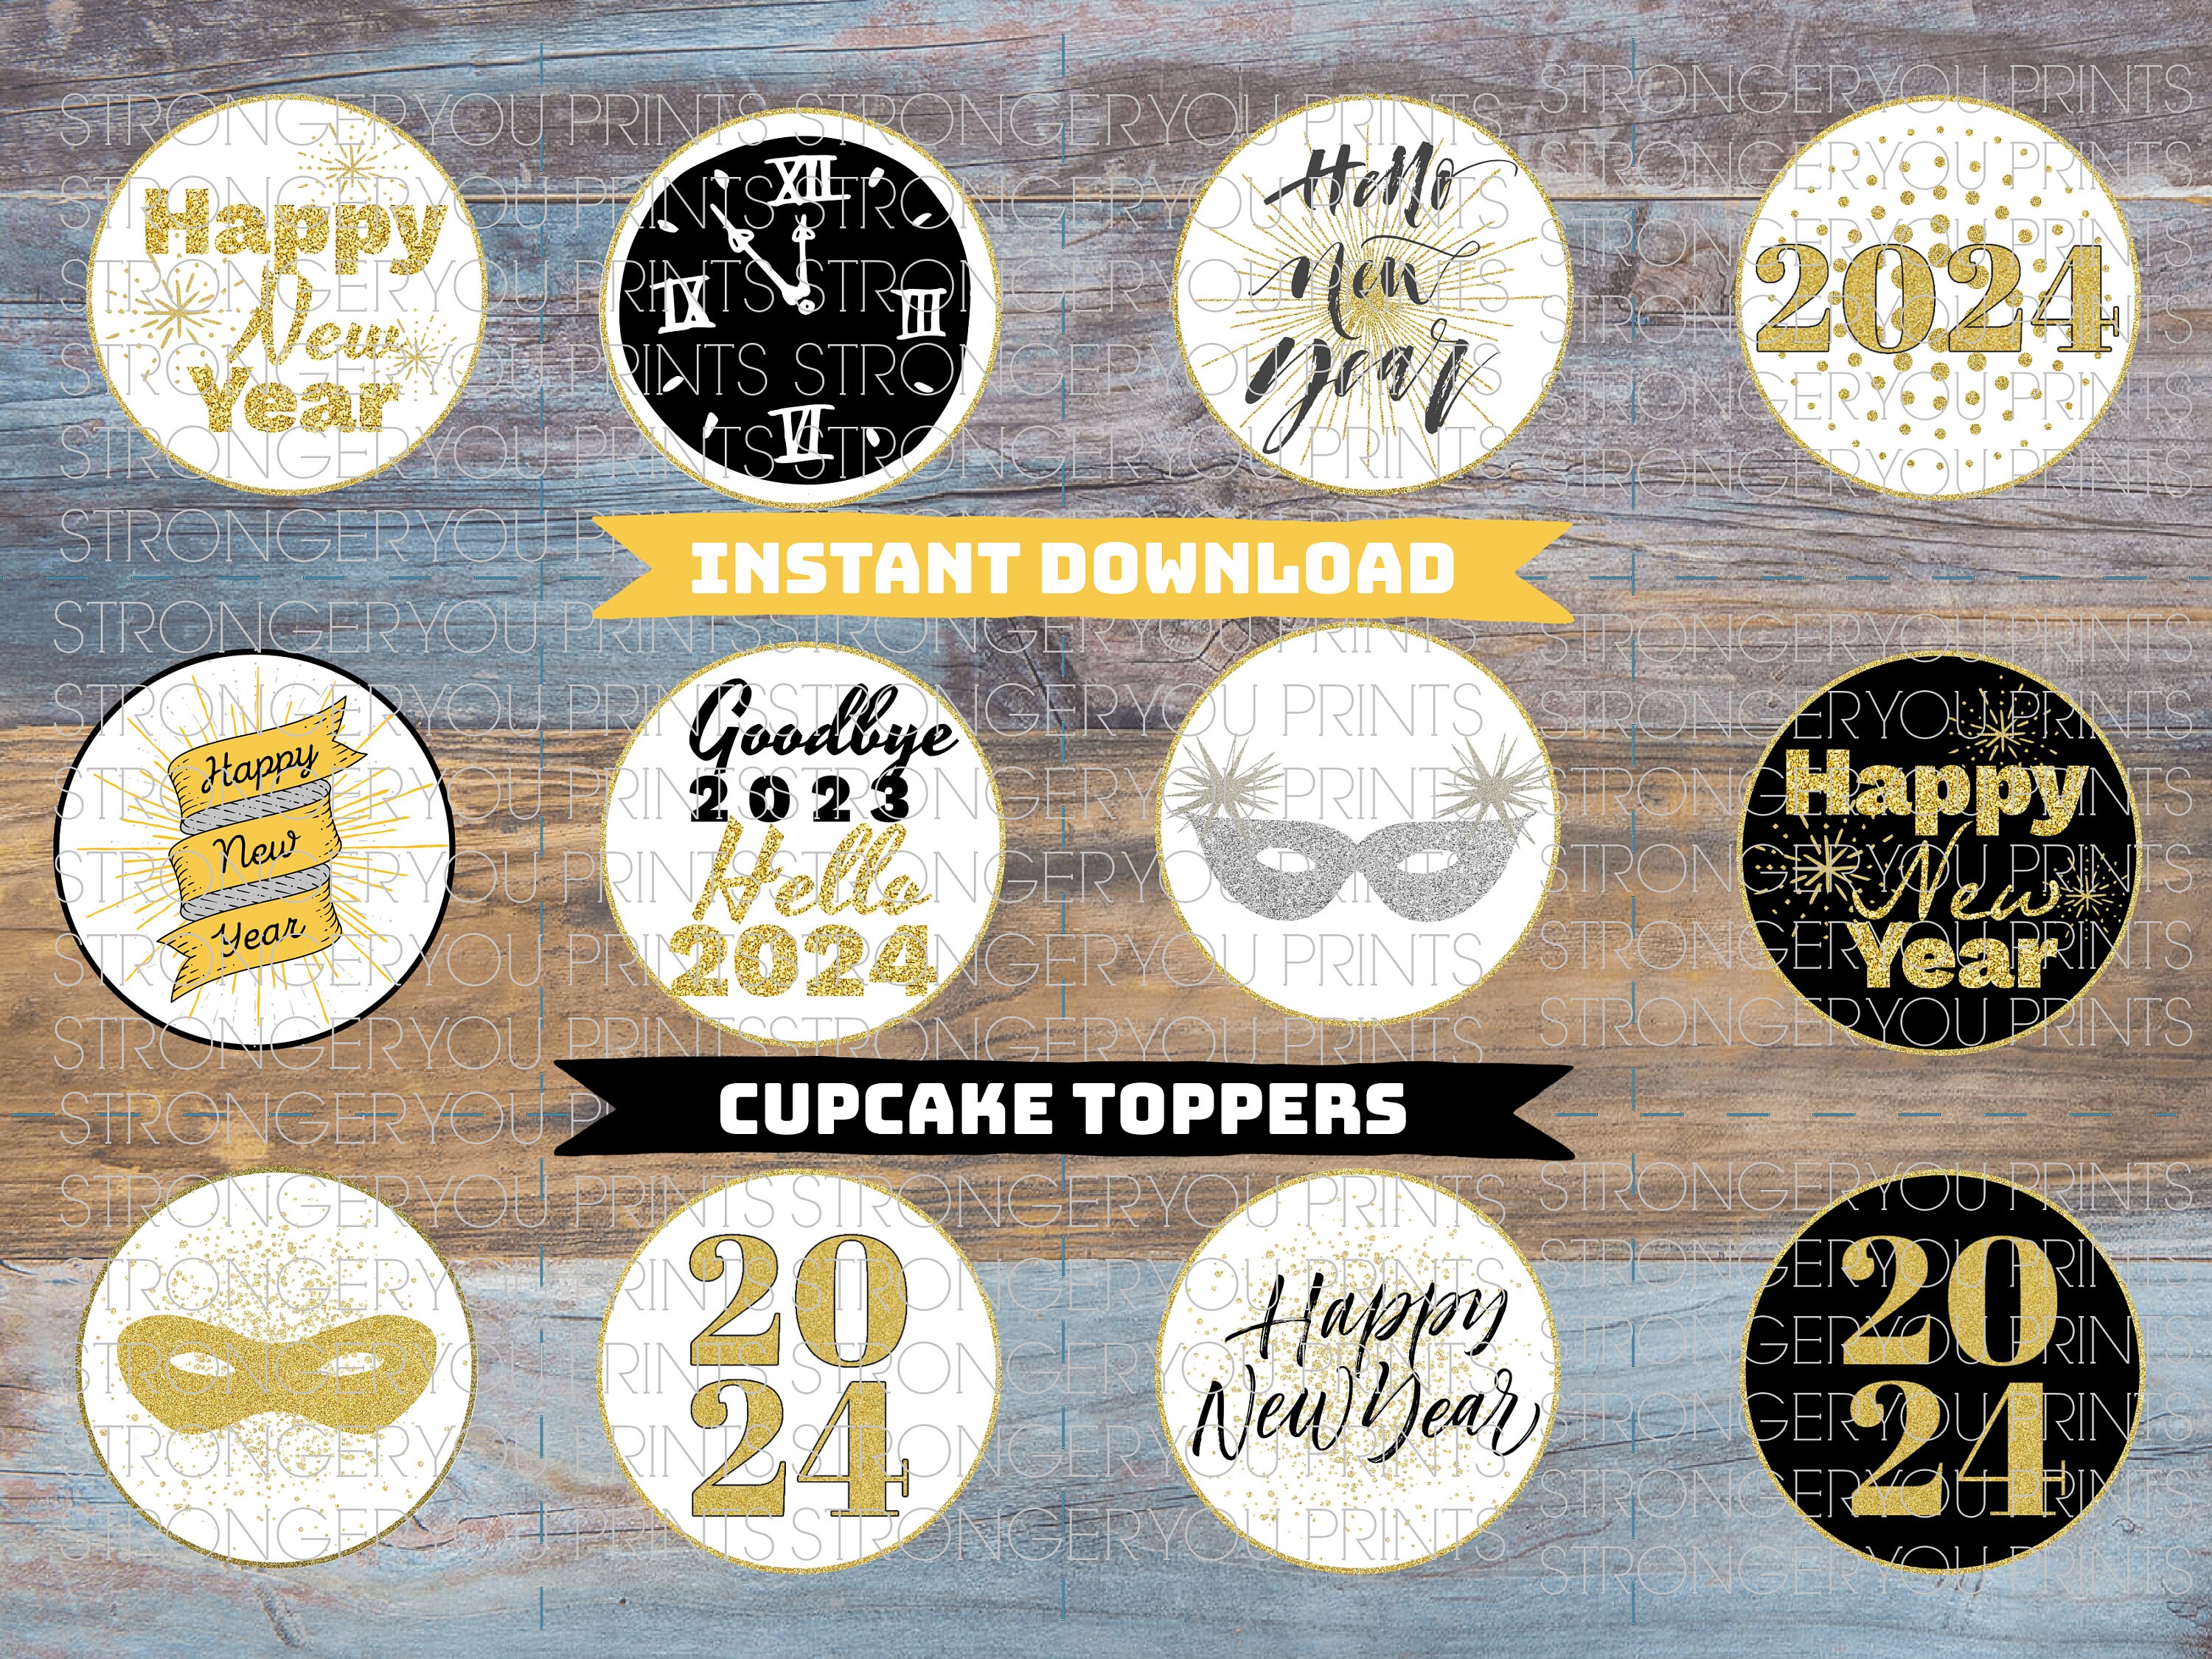 Happy New Year 2024 Text Edible Toppers - (20 Toppers)